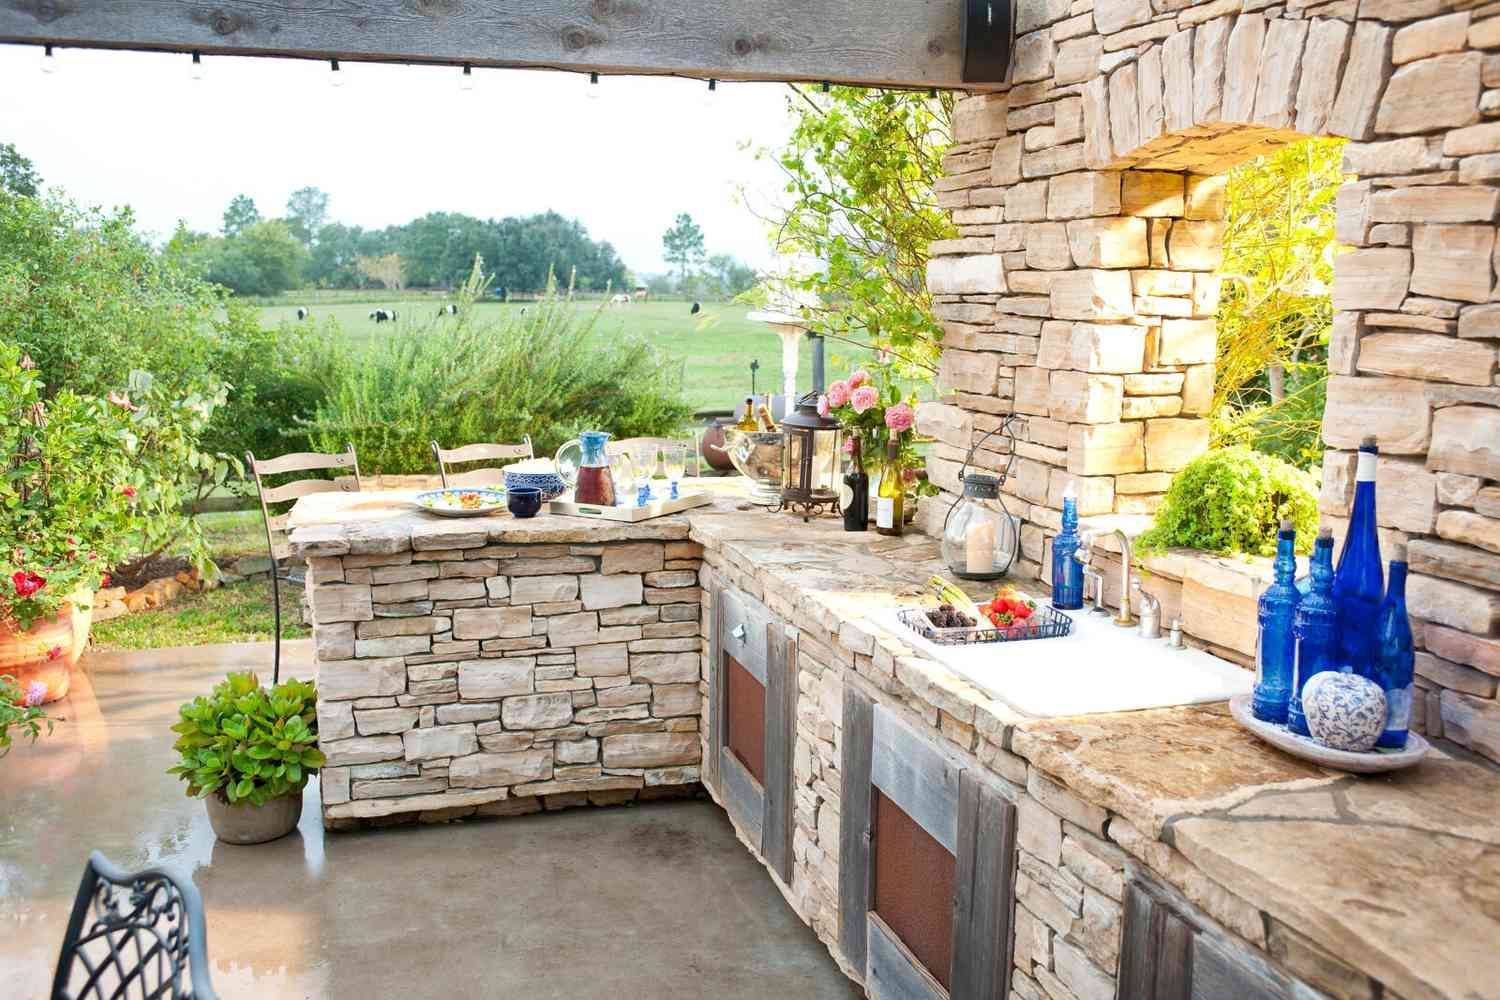 The Top 5 Features to Include in Your Outdoor Kitchen Design